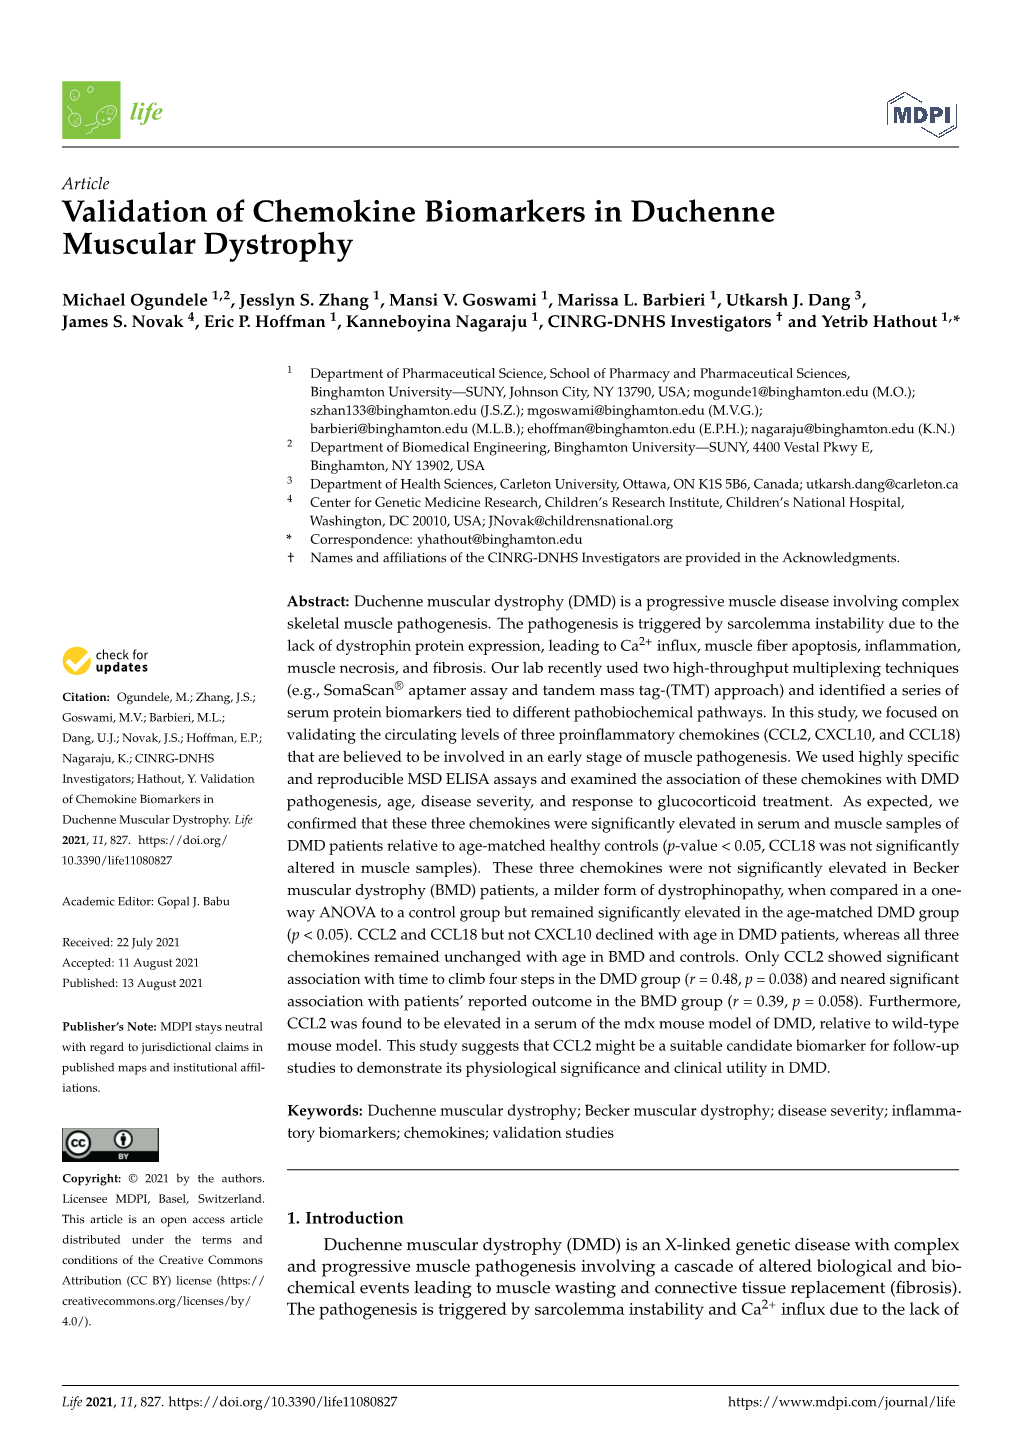 Validation of Chemokine Biomarkers in Duchenne Muscular Dystrophy